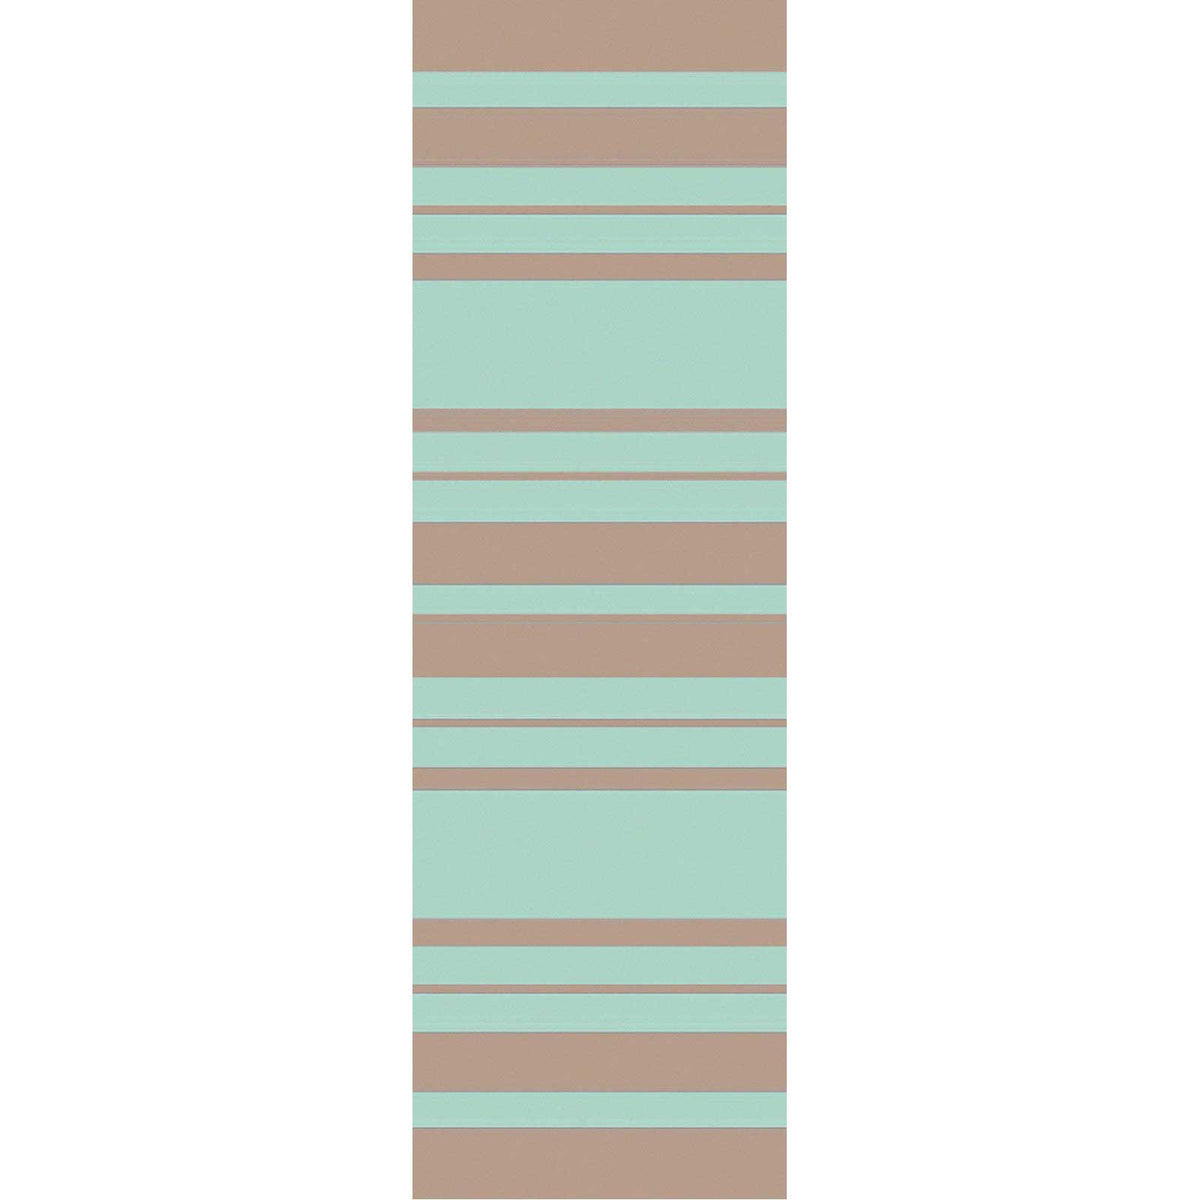 Picnic Striped Mint/Taupe Runner Rug